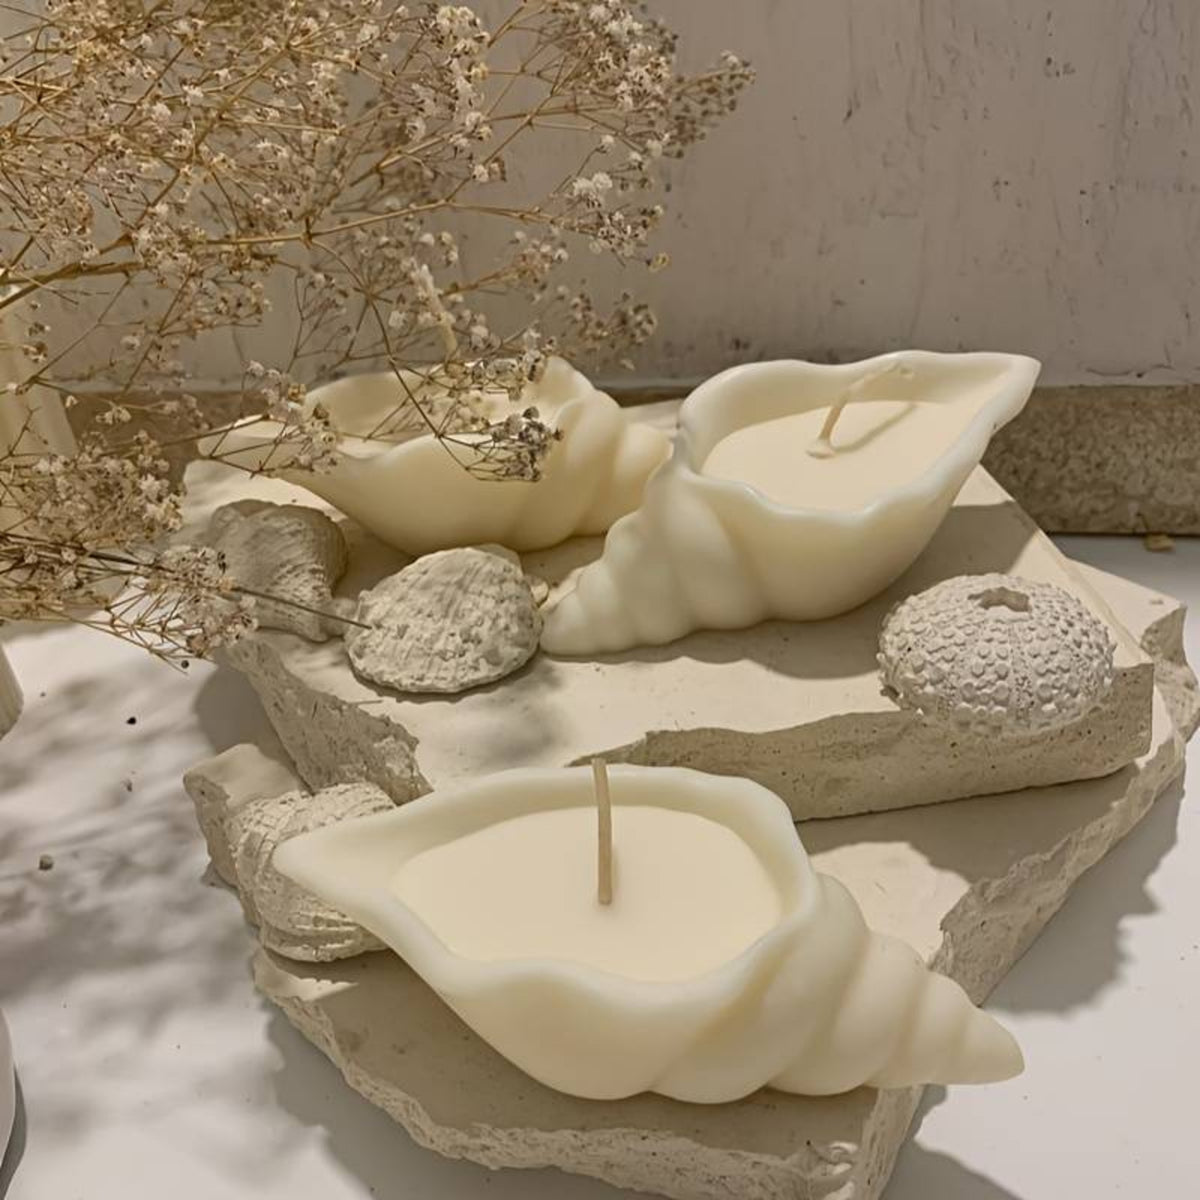 Believe it or not these beautiful candles in a shell shape are now